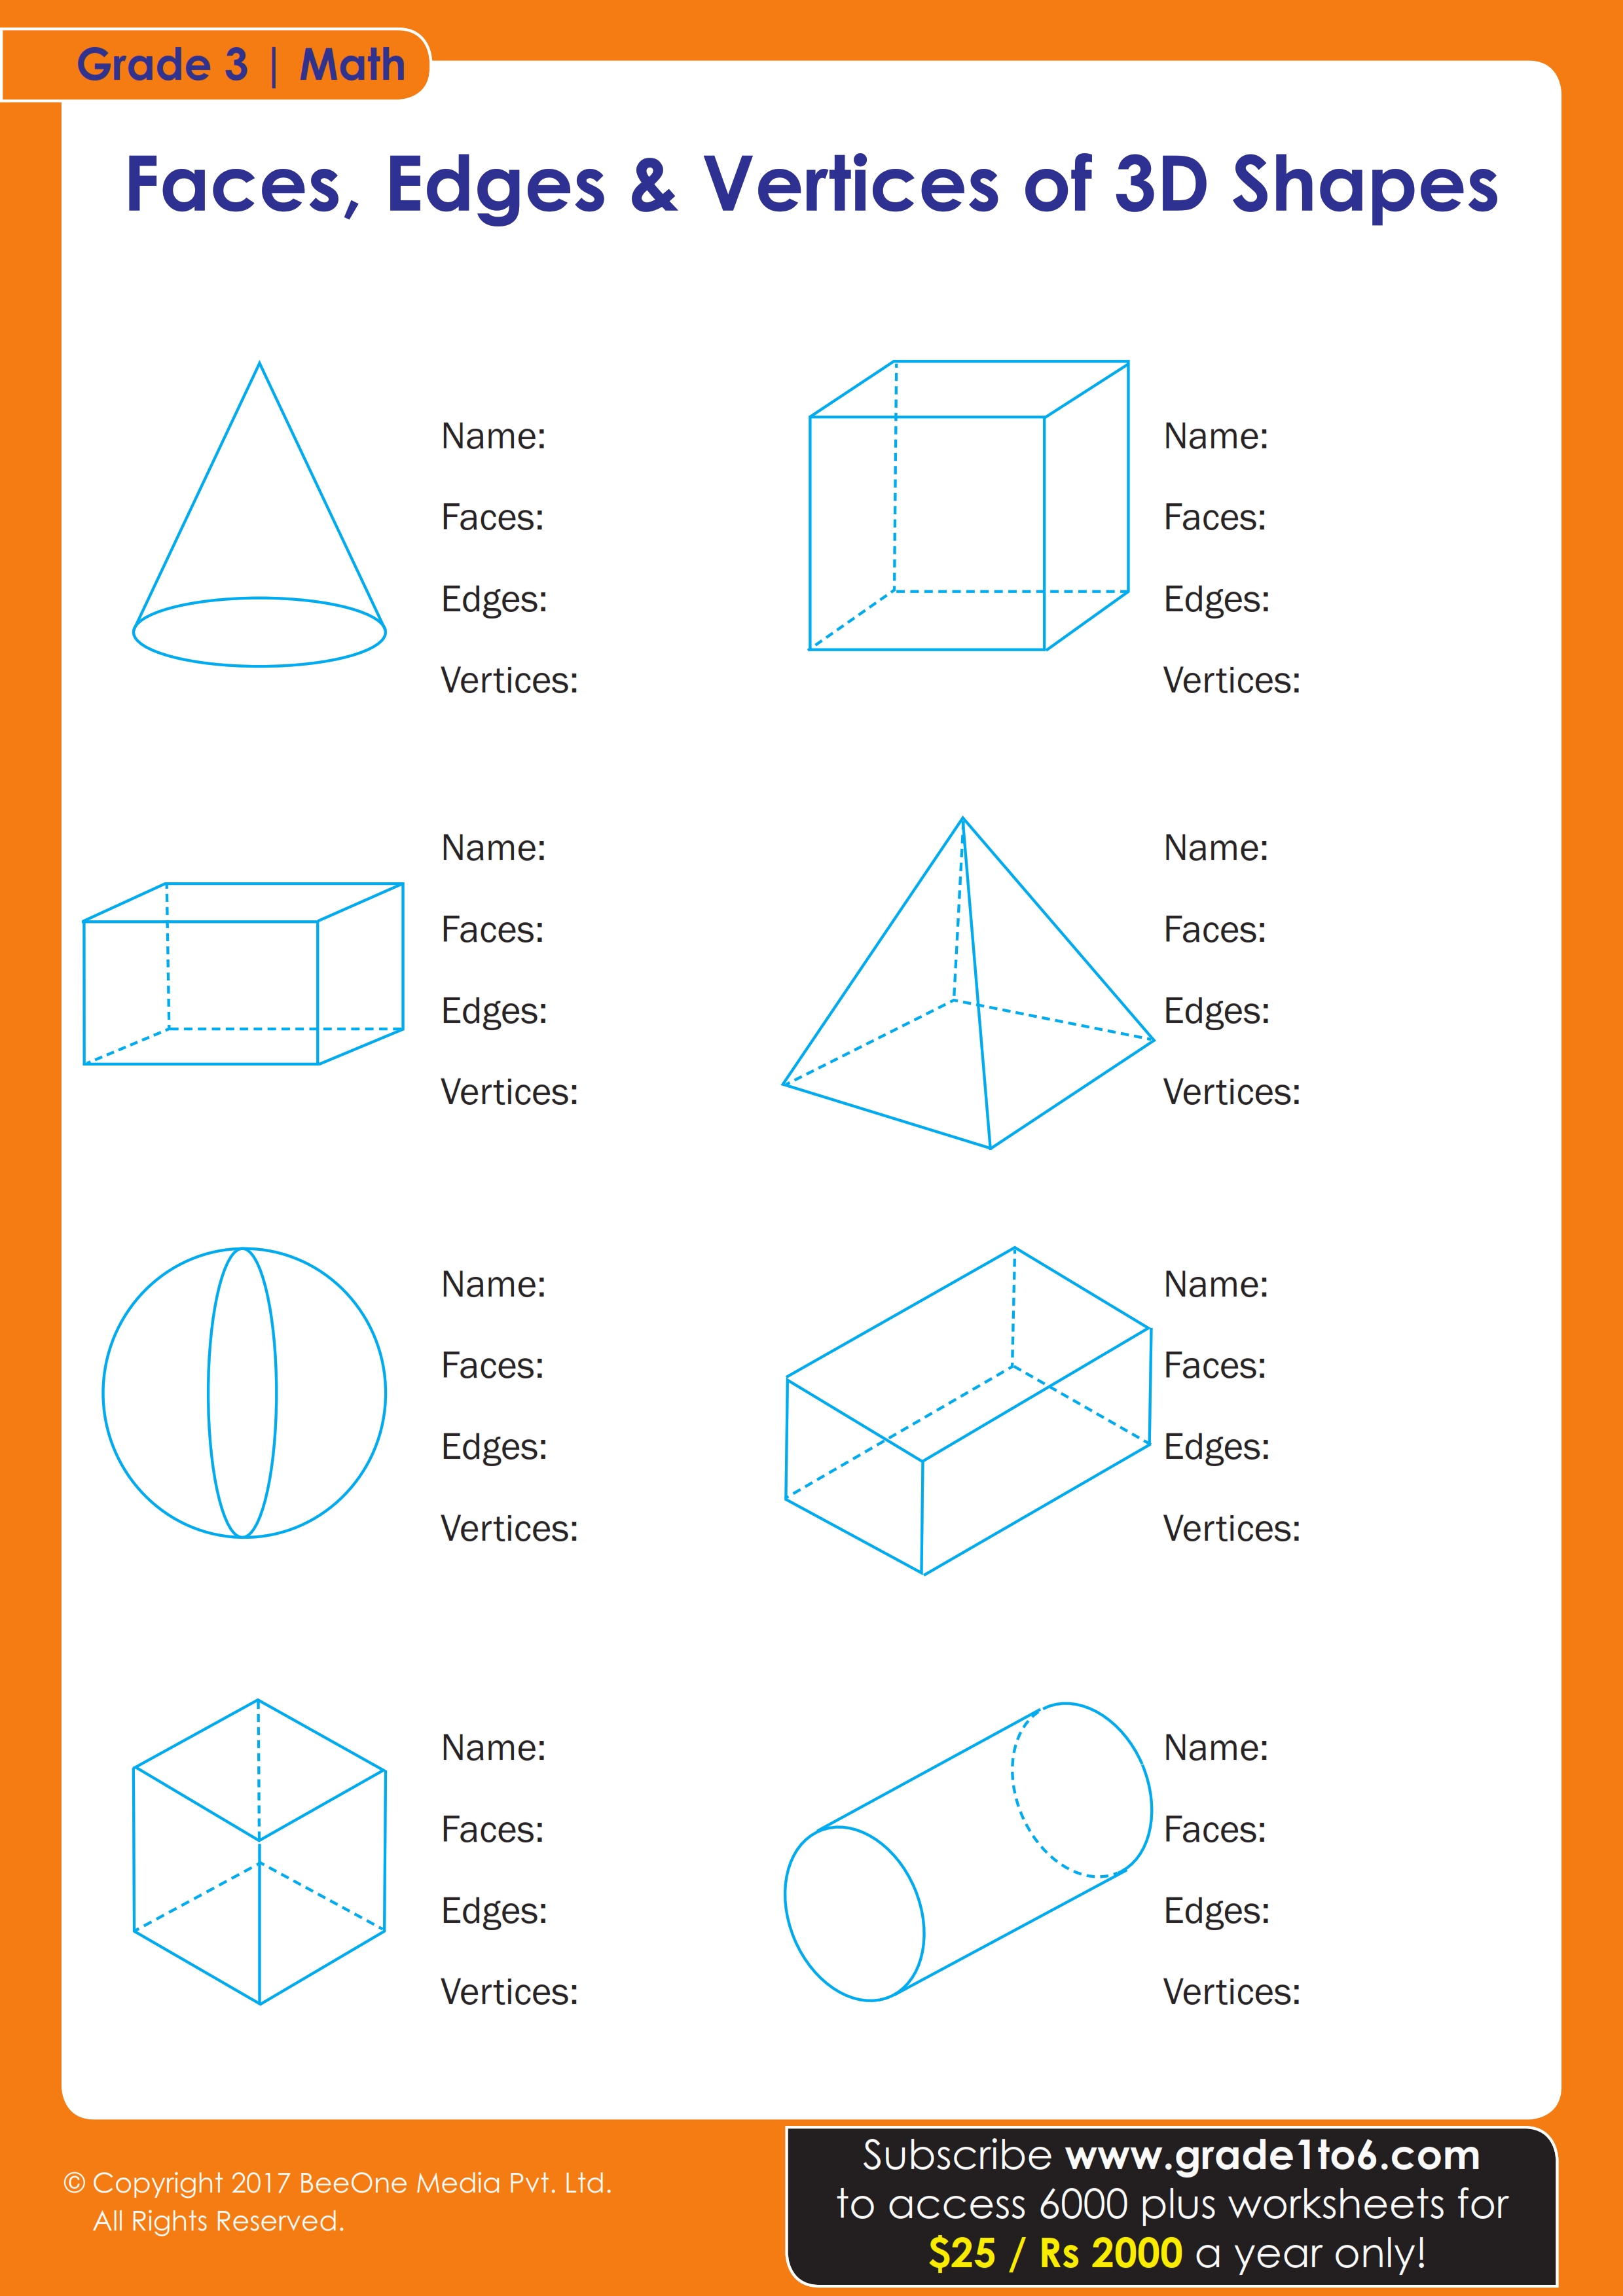 vertices on 3 d shapes